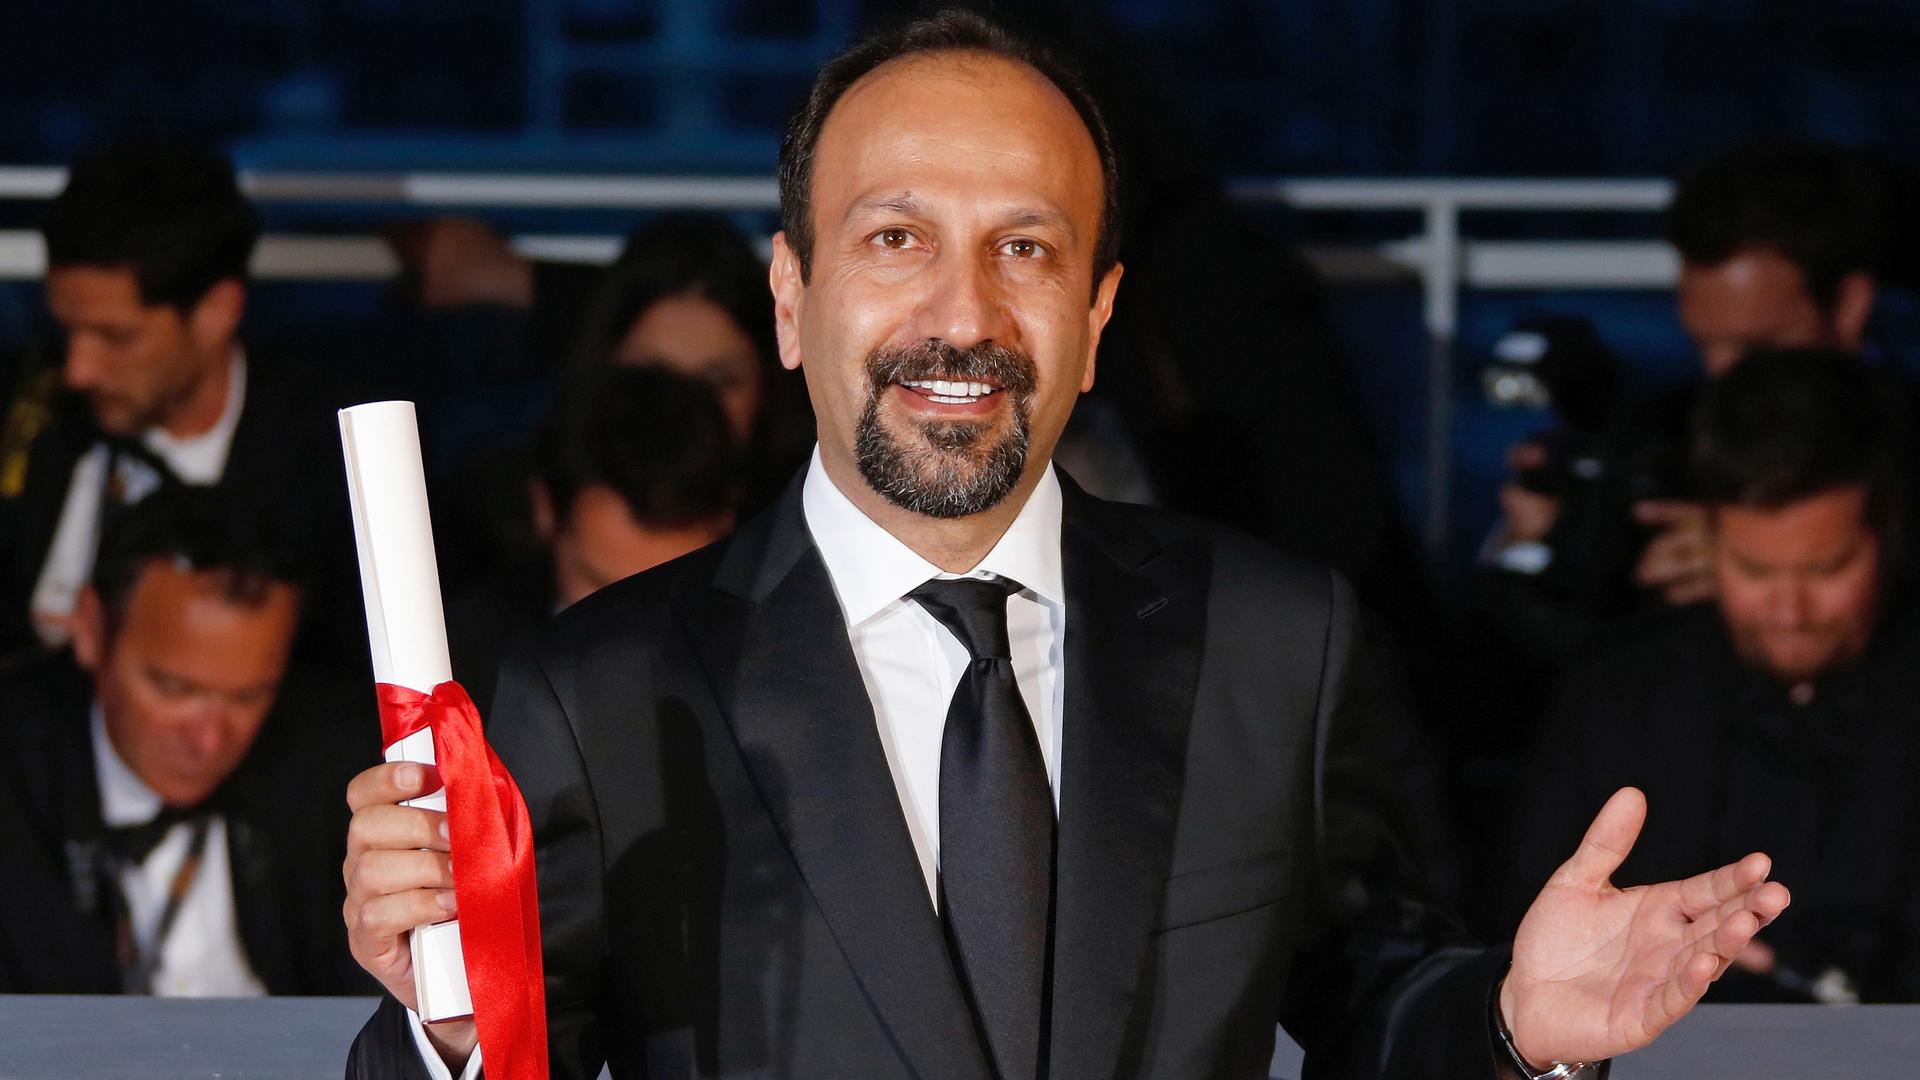 Director Asghar Farhadi, Best screenplay award winner for the film "Forushande" (The Salesman), poses during a photocall after the closing ceremony of the 69th Cannes Film Festival in Cannes, France, May 22, 2016.